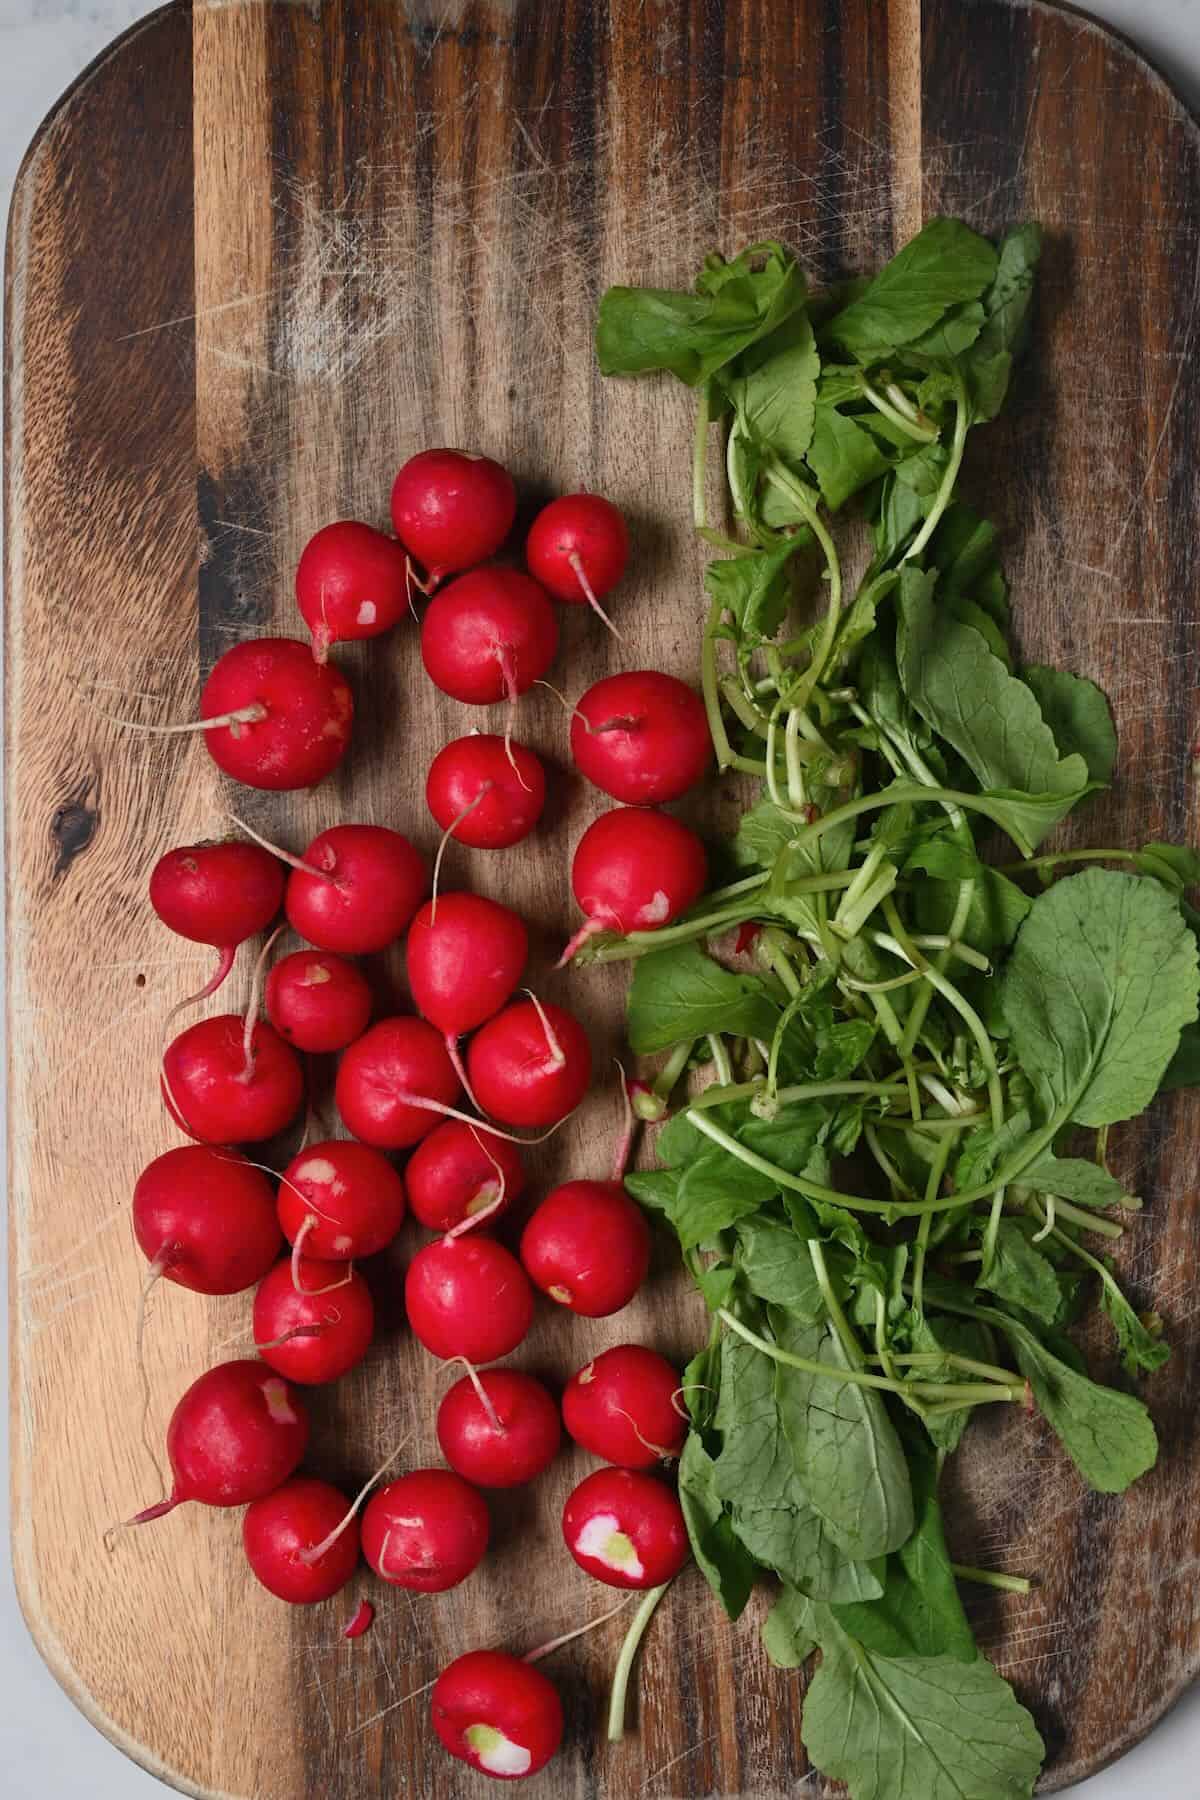 Radishes with their greens removed